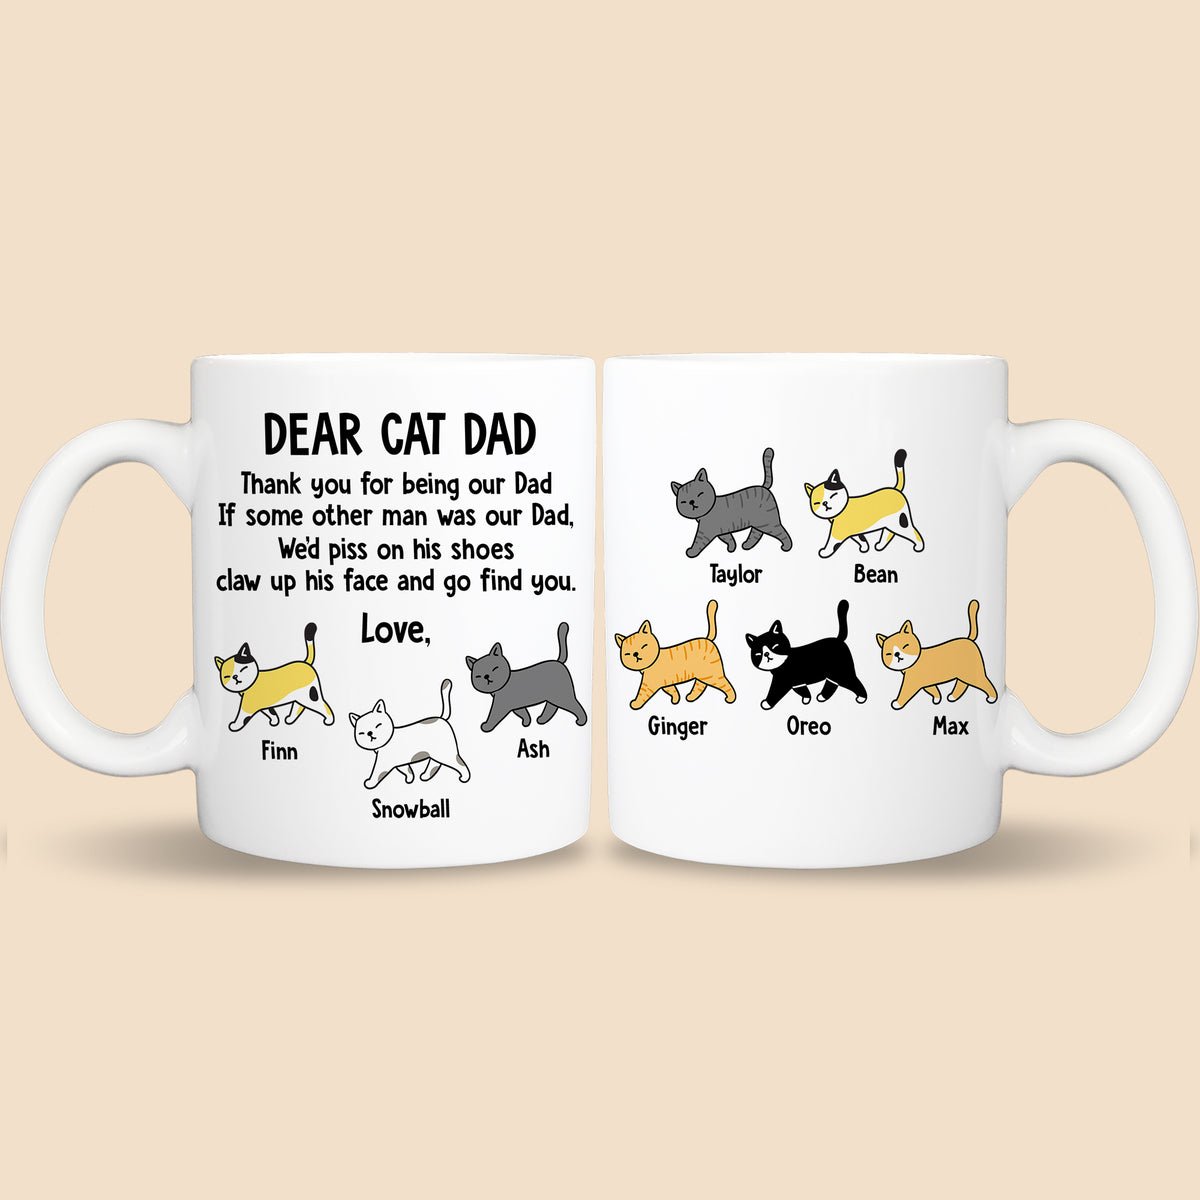 Dear Cat Dad - Personalized White Mug - Best Gift For Father - Giftago